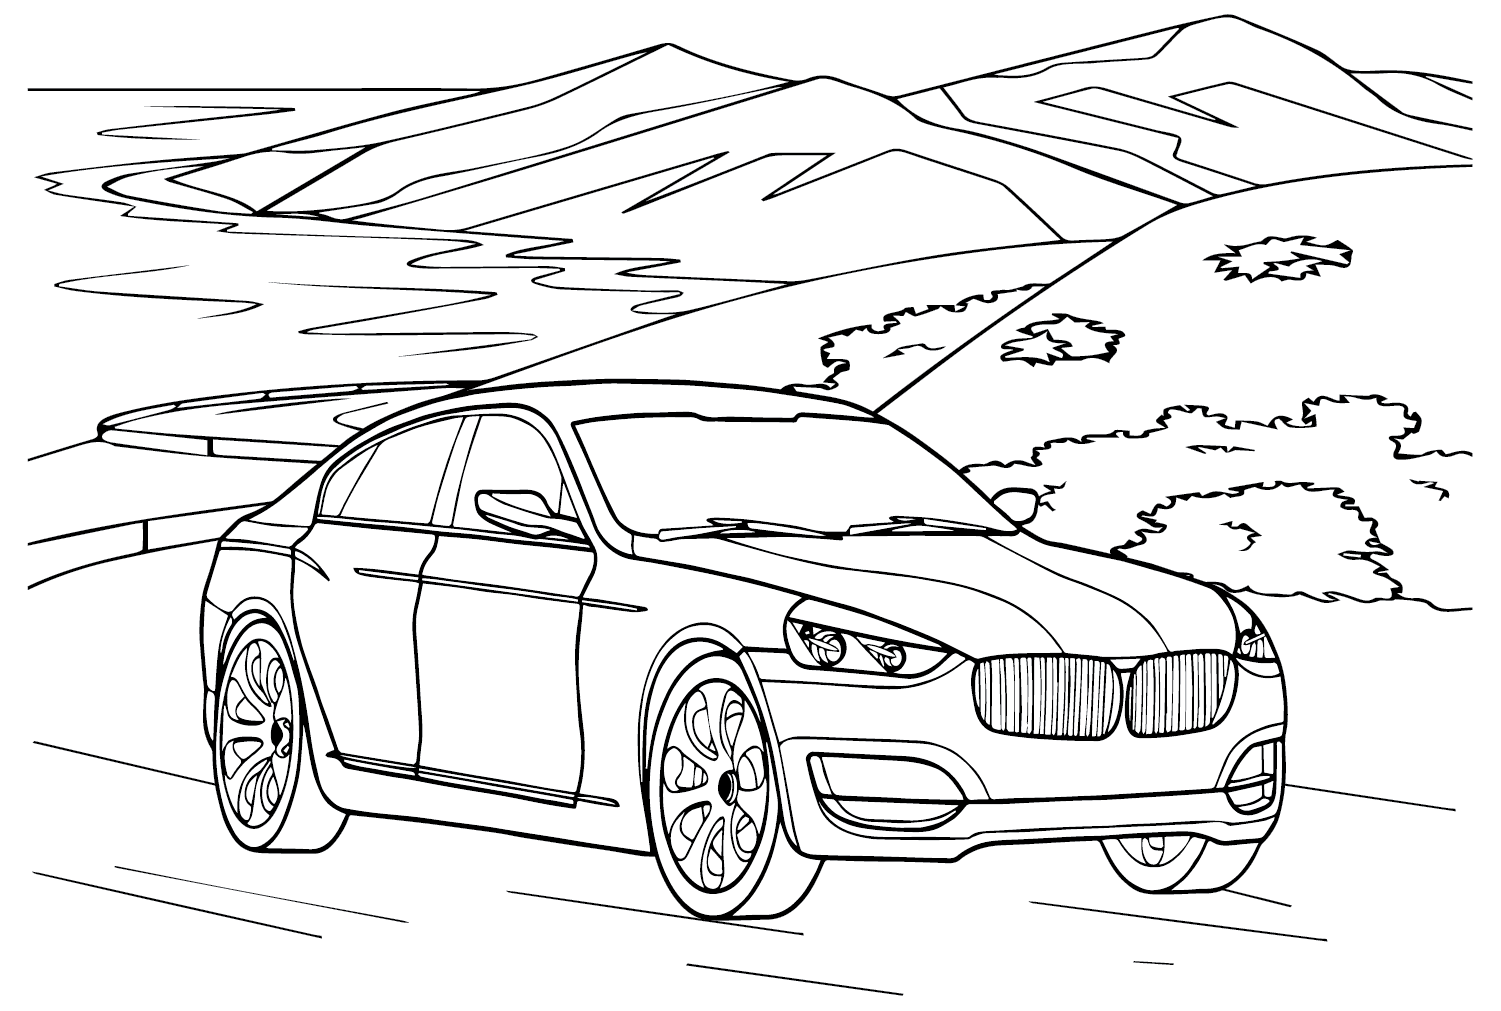 BMW M Coupe Coloring Page BMW Coloring Pages Coloring Pages For